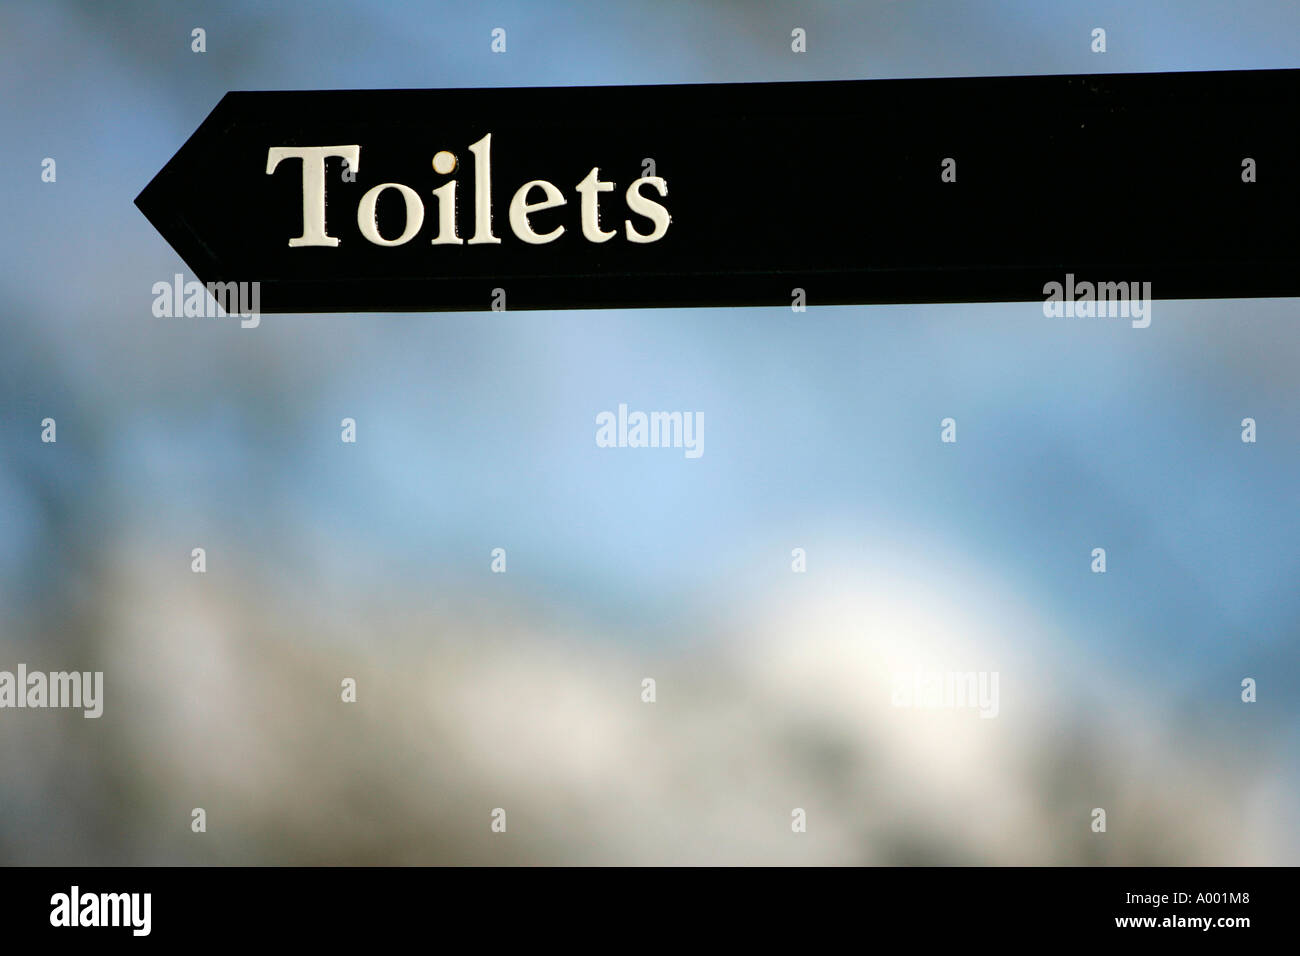 Toilet sign signing alphabetical billboard letters lettering script writing words bathroom information lavatory icon location Stock Photo